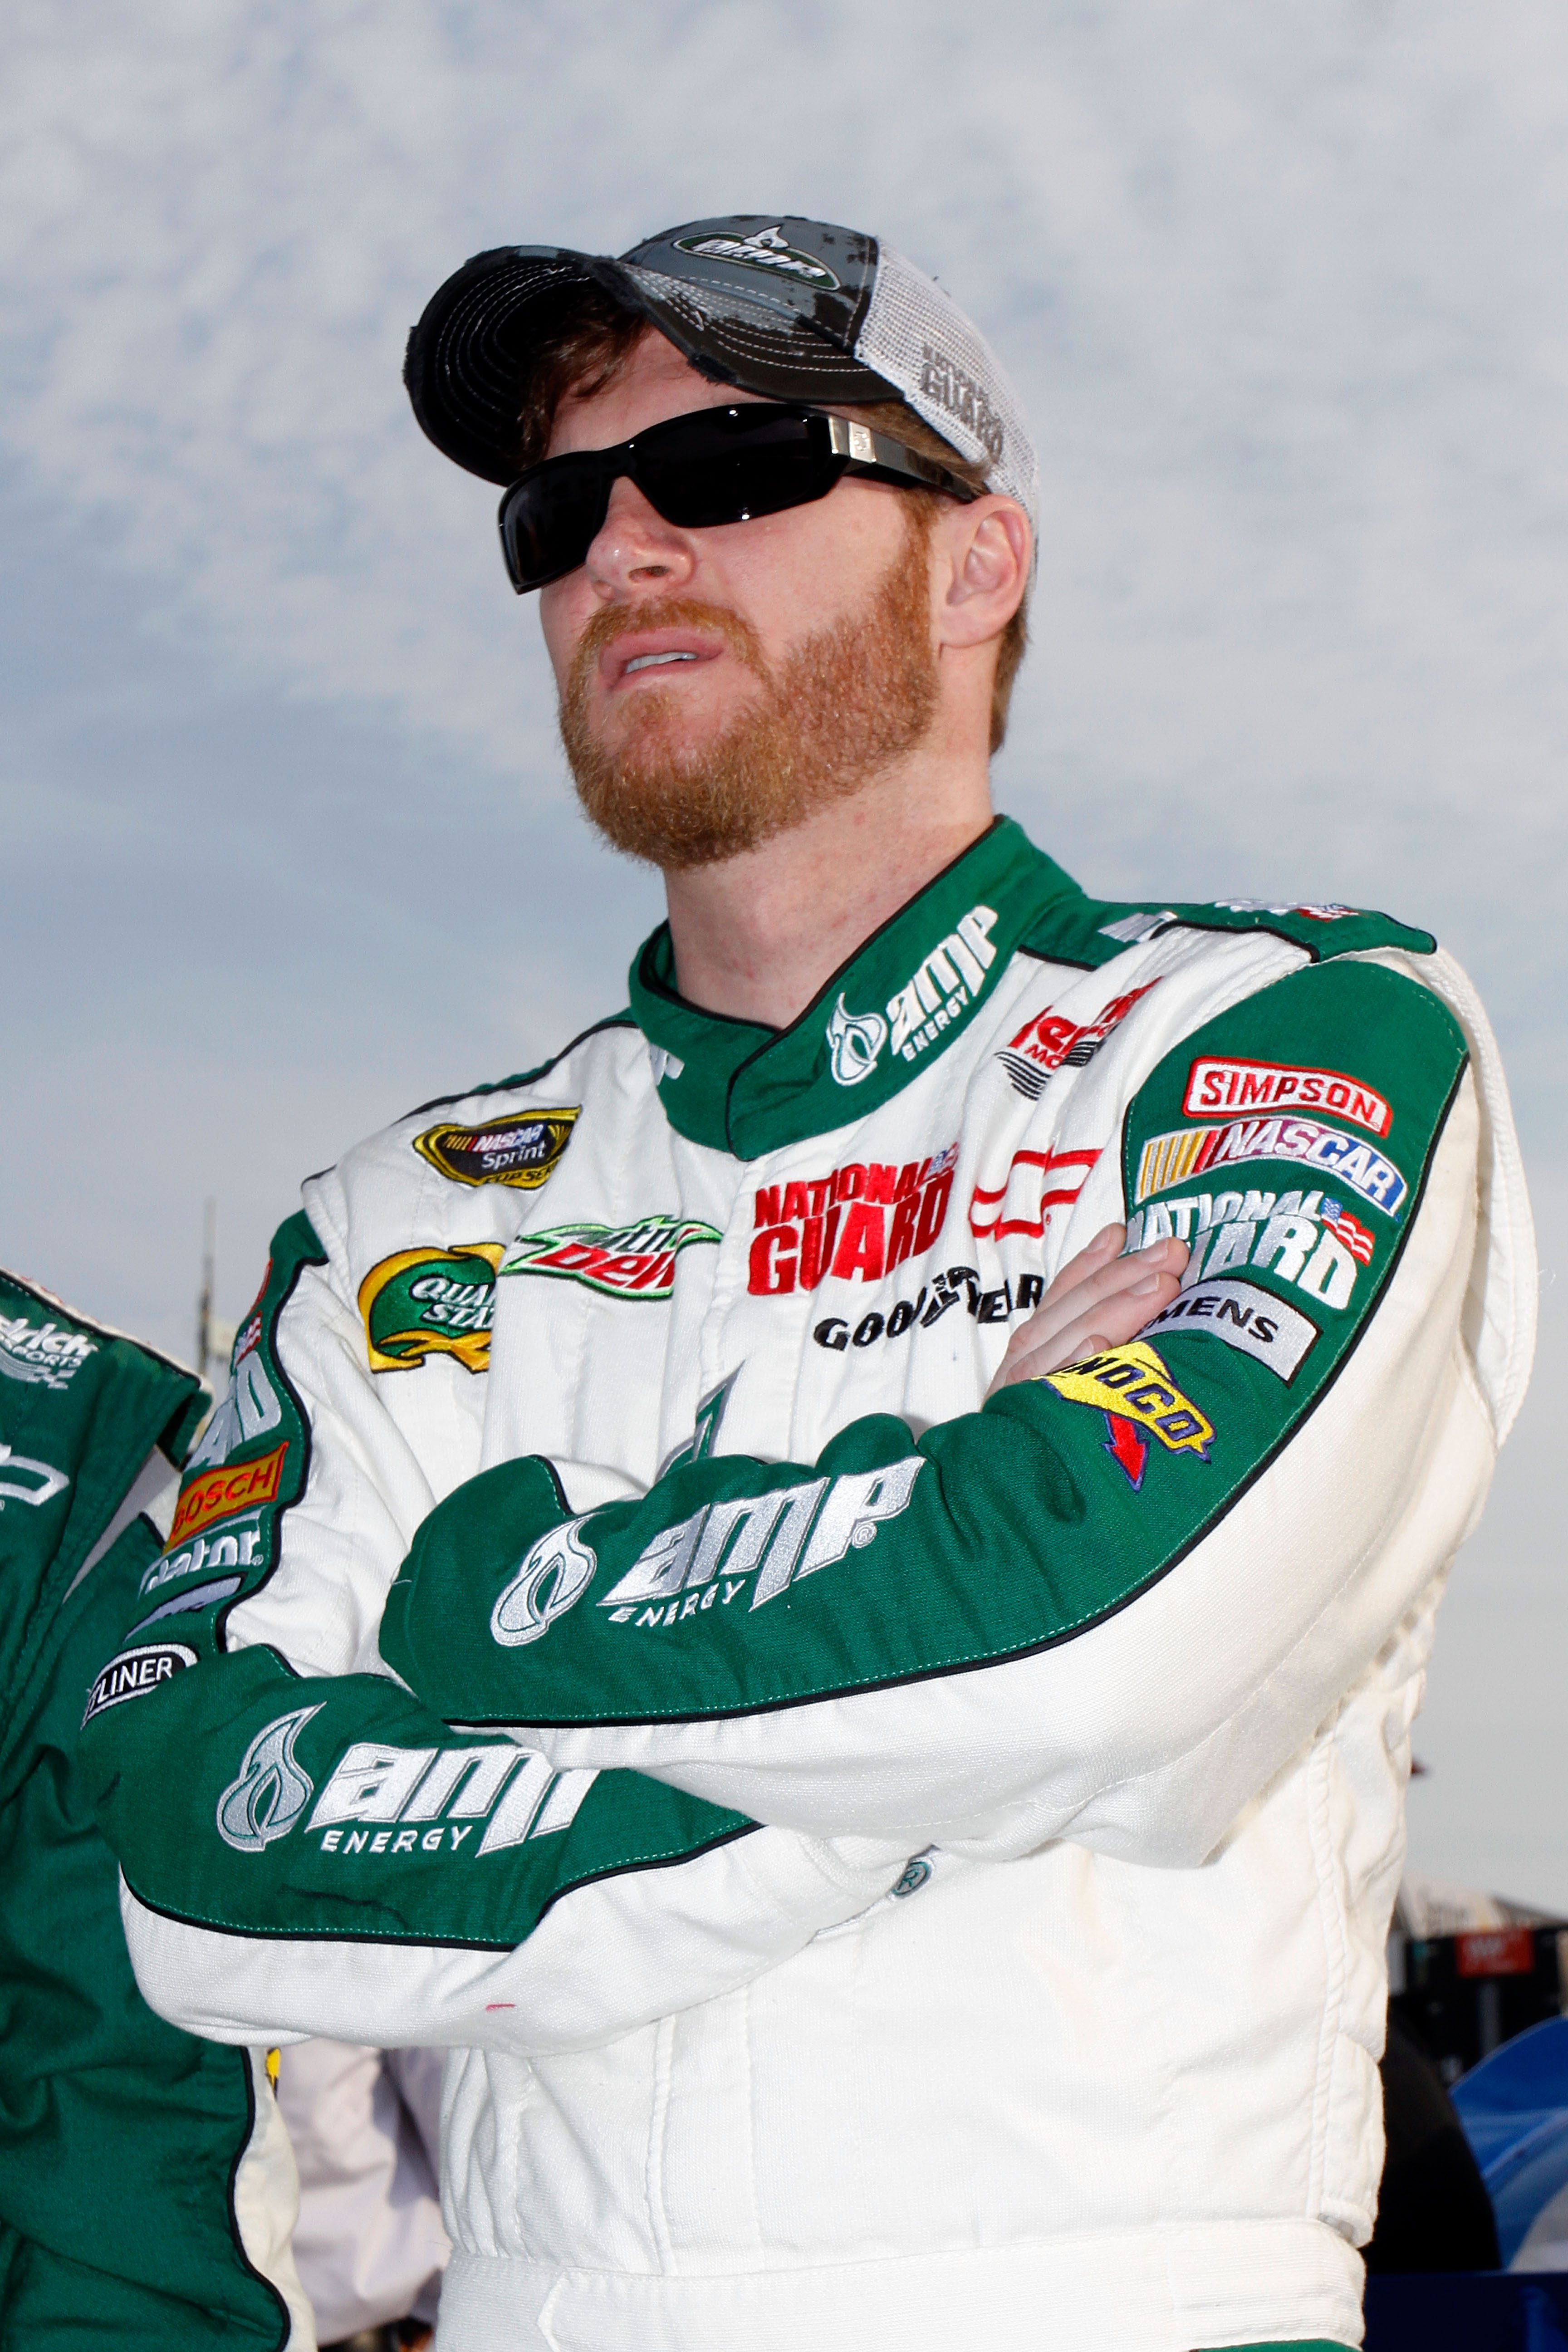 FORT WORTH, TX - APRIL 09:  Dale Earnhardt Jr., driver of the #88 Amp Energy/National Guard Chevrolet, stands on the grid prior to the NASCAR Sprint Cup Series Samsung Mobile 500 at Texas Motor Speedway on April 9, 2011 in Fort Worth, Texas.  (Photo by Ja